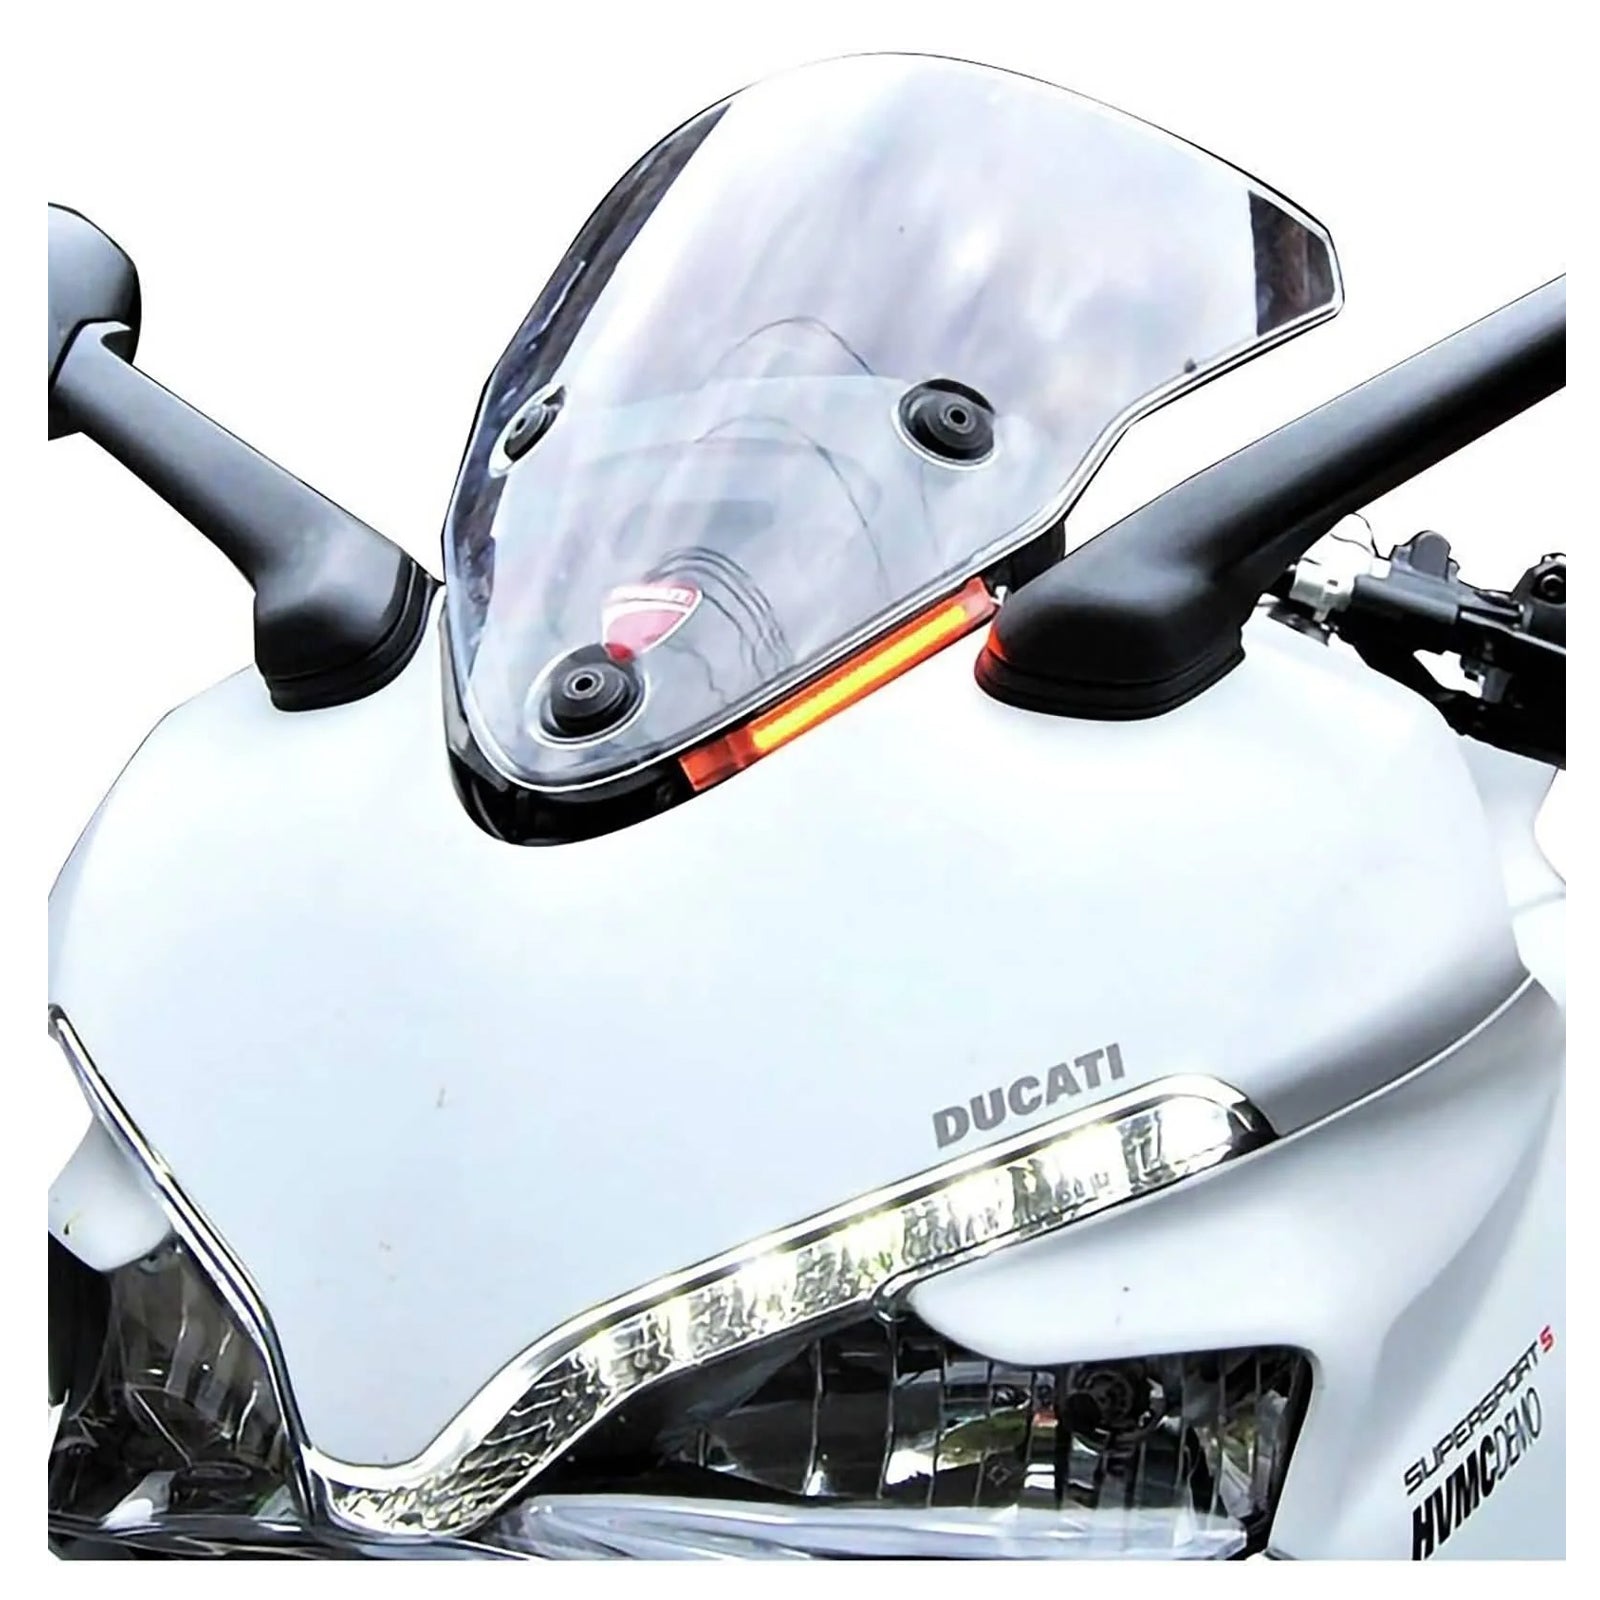 New Rage Cycles Ducati Supersport 939 Front Turn Signals - Motorcycle Accessories